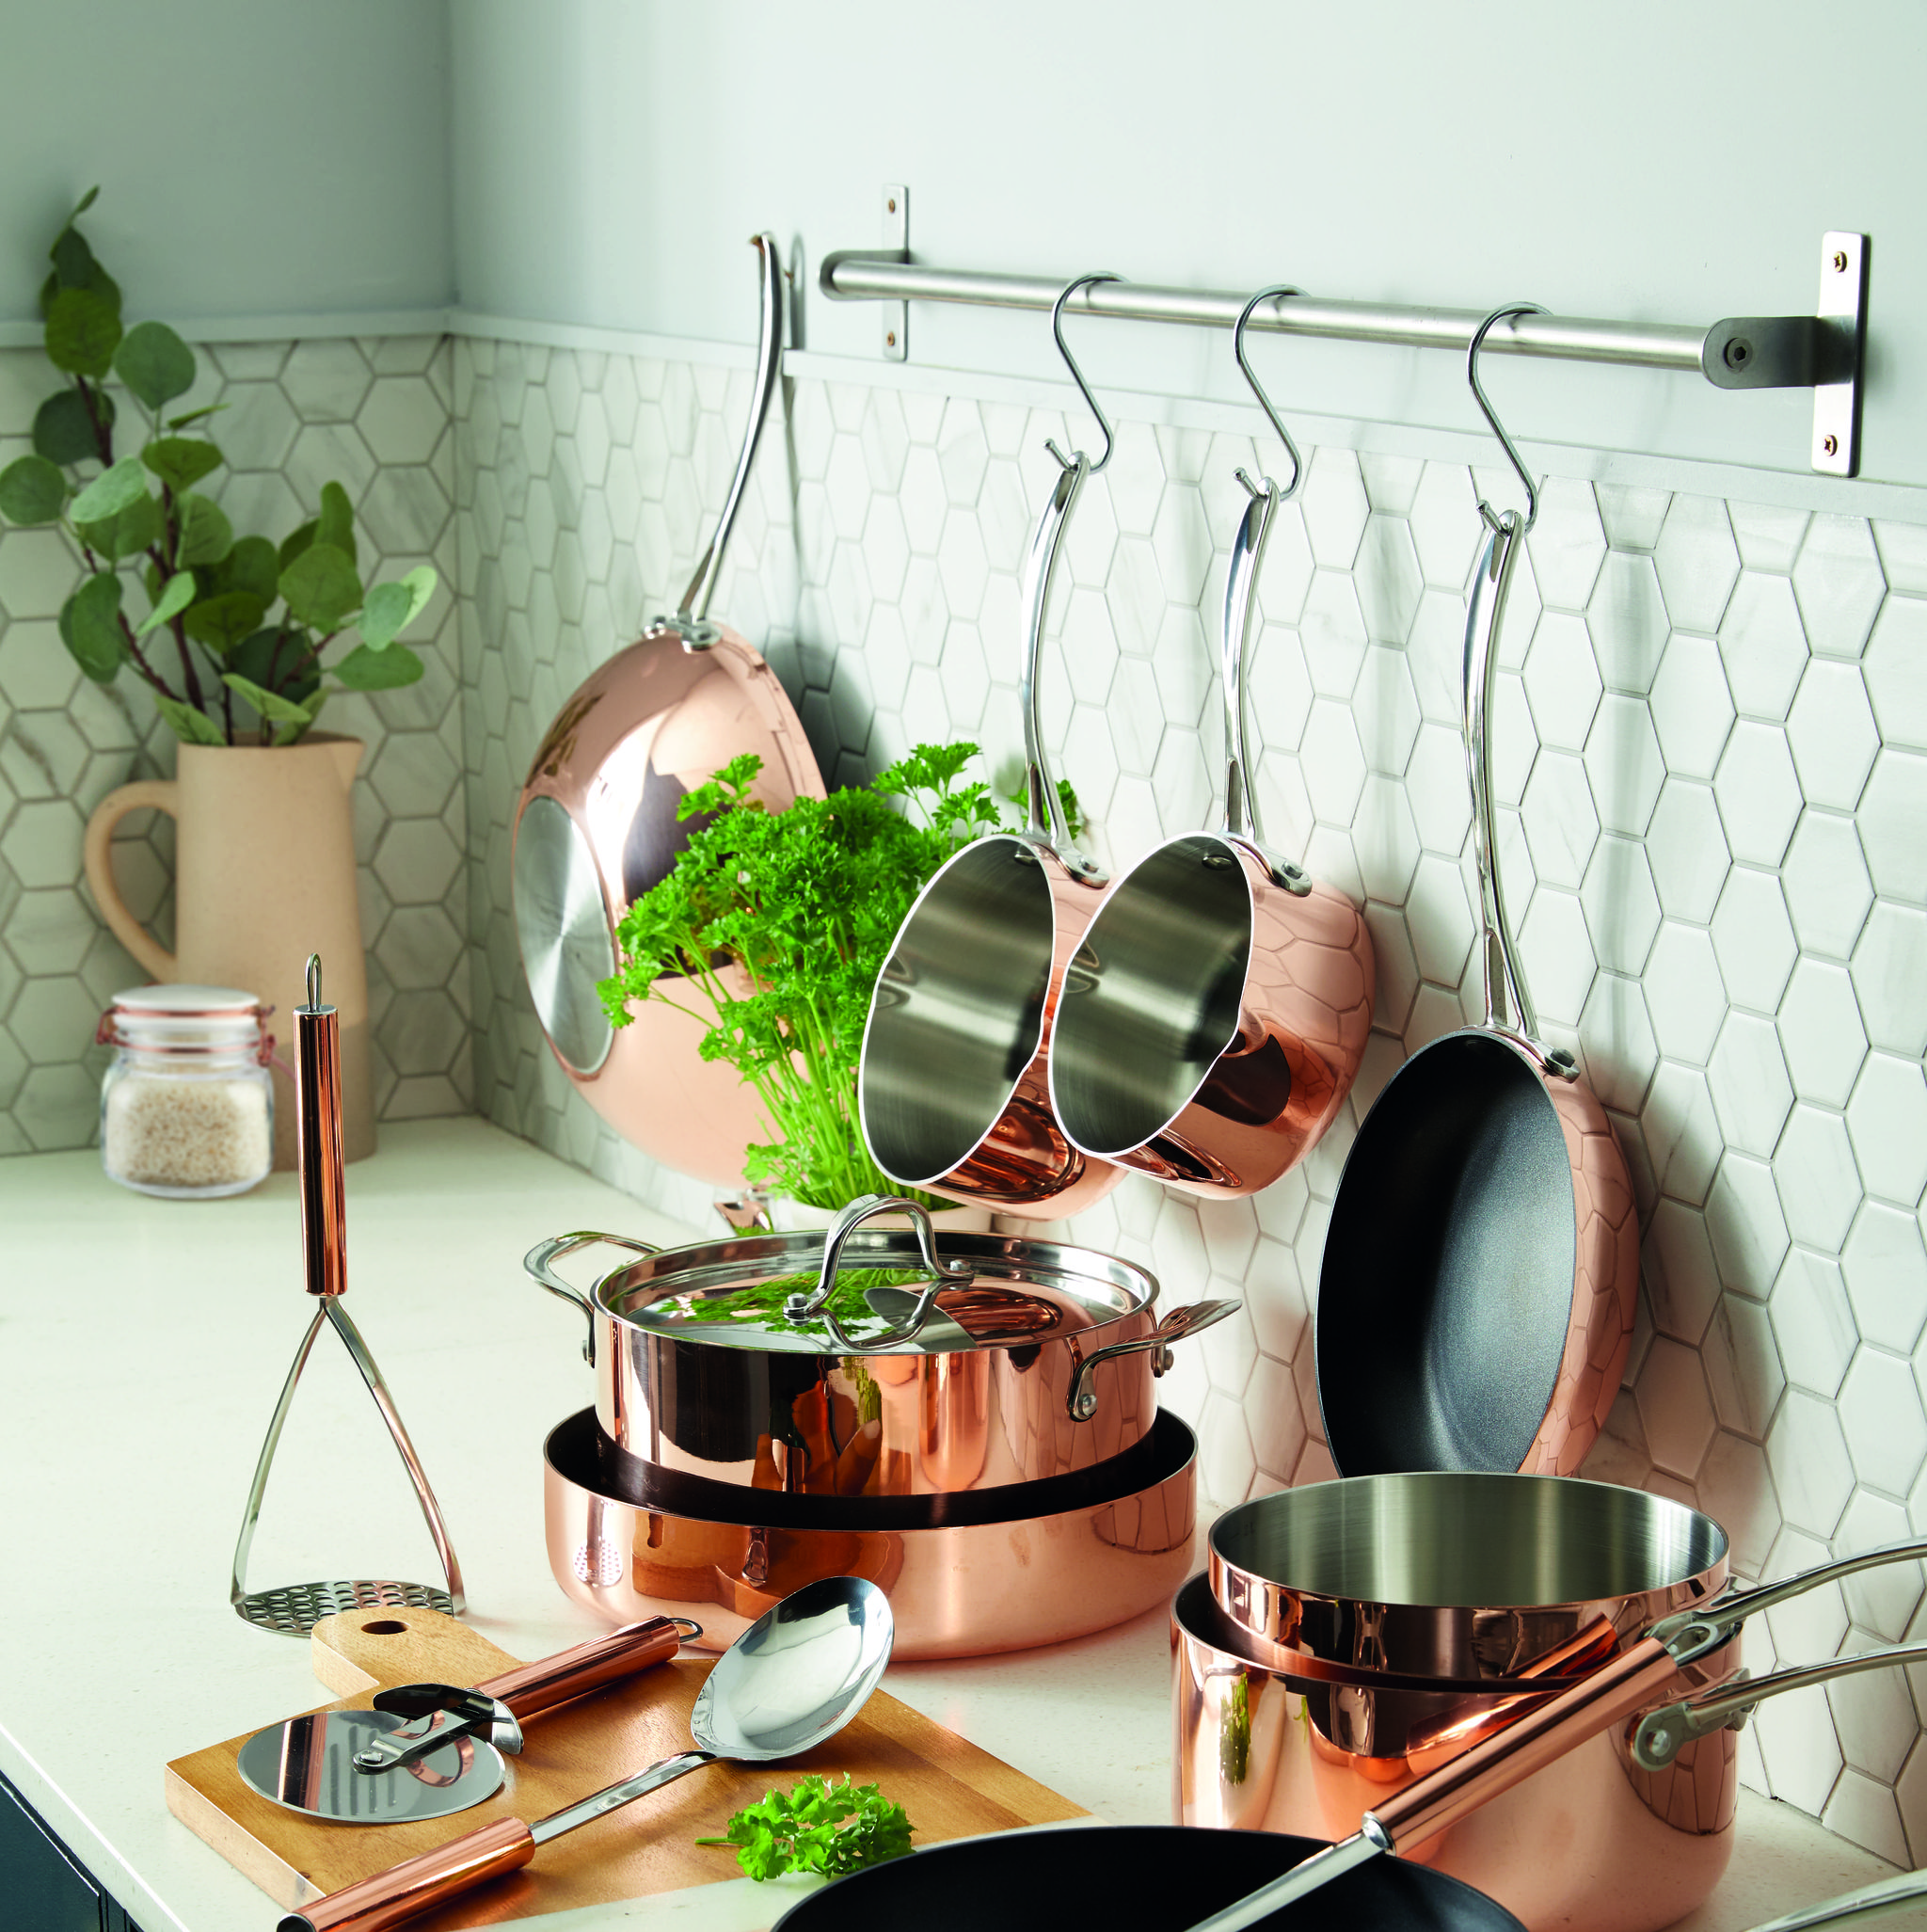 Aldi Is Releasing a New Line of Floral Cookware